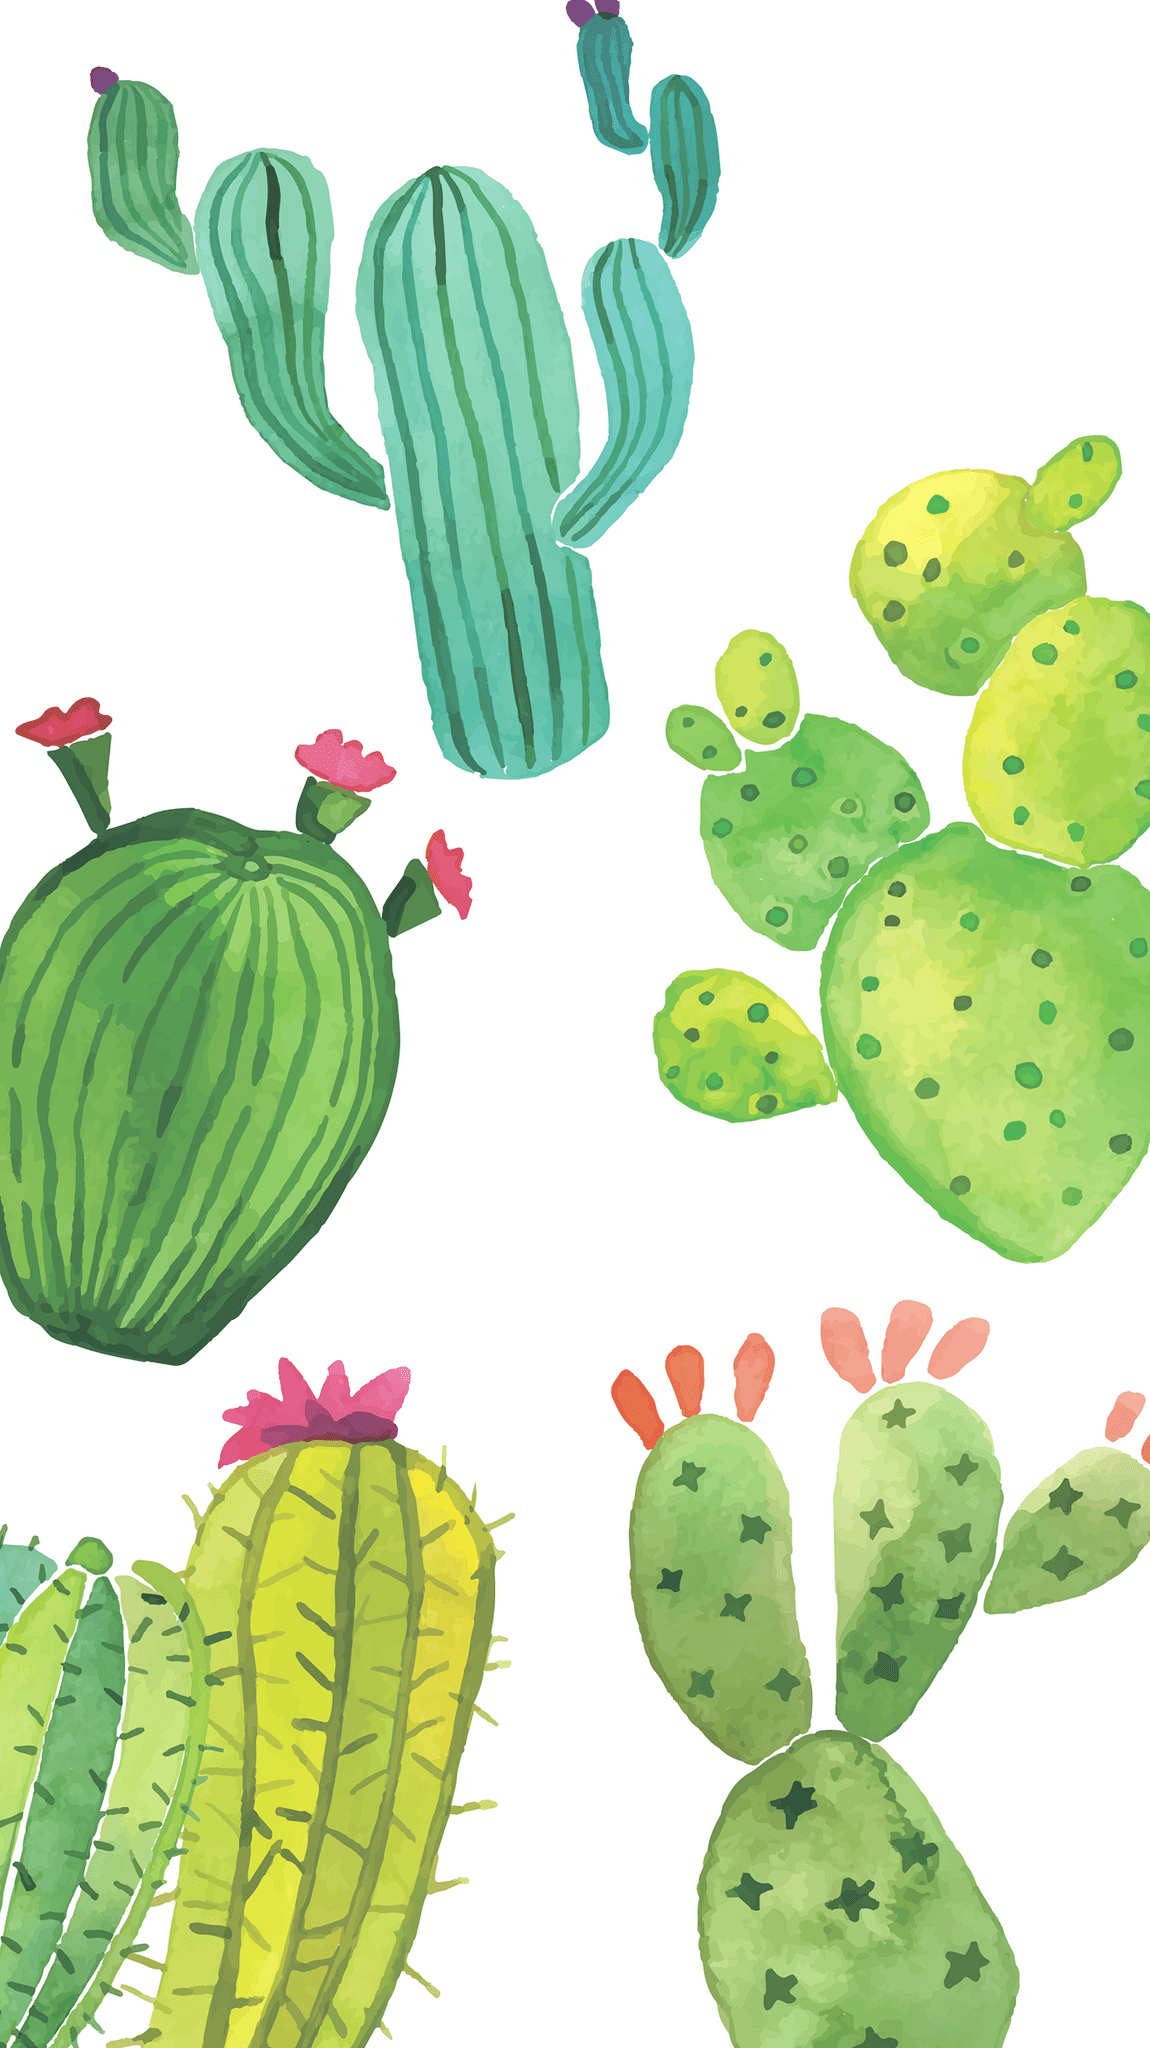 A set of cactus drawings with different colors - Cactus